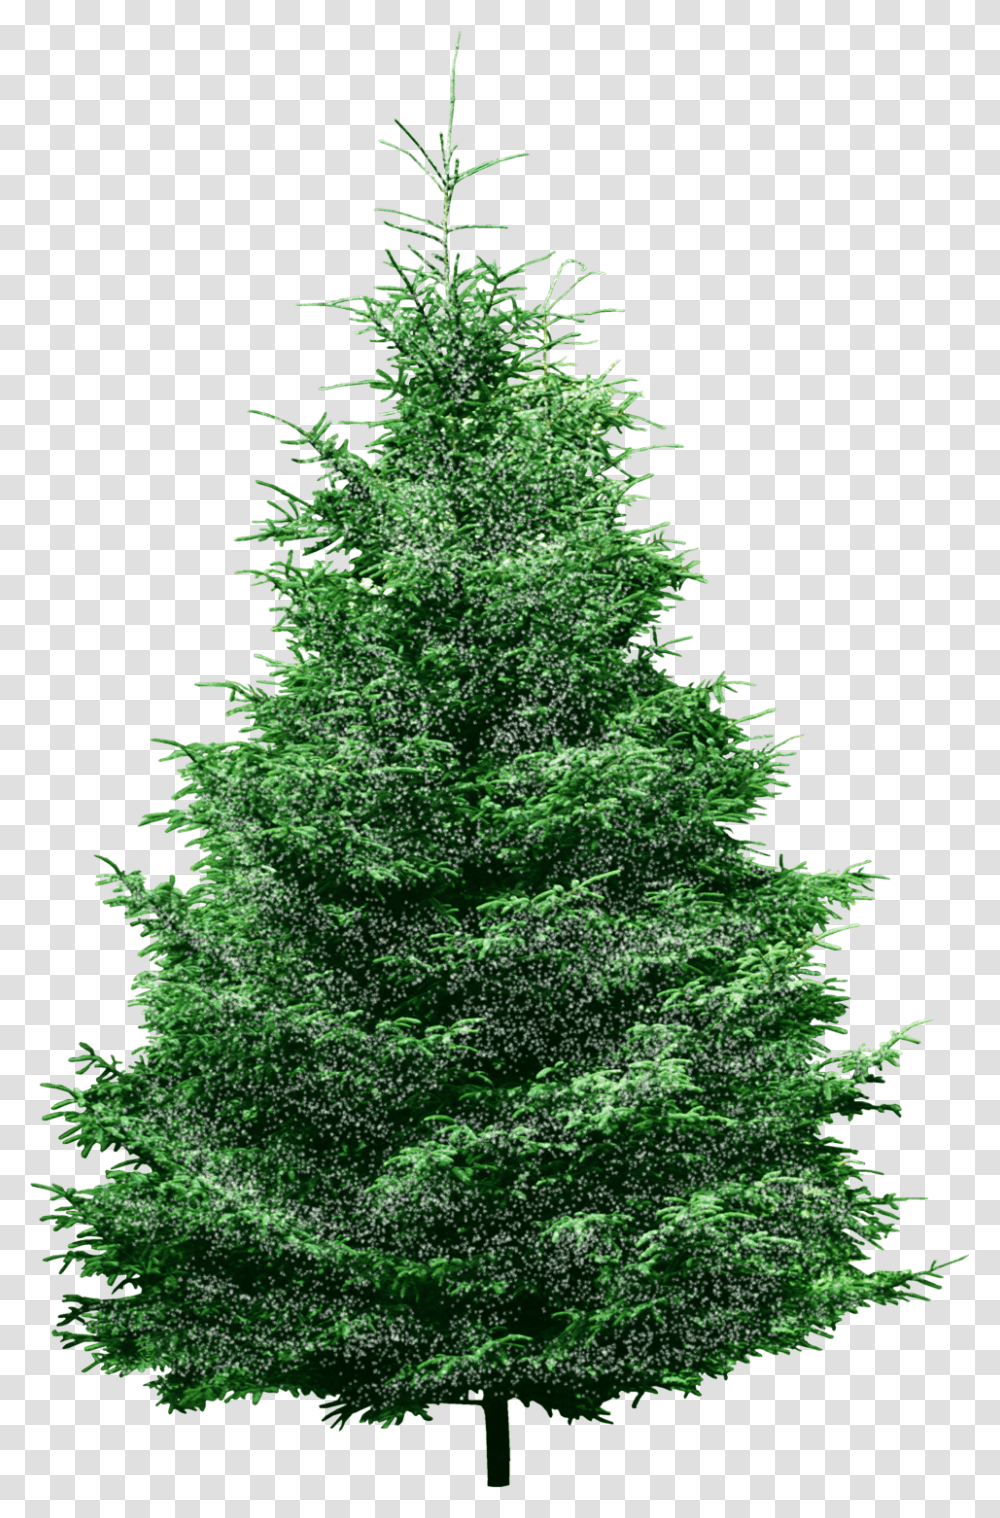 Machine Embroidery Machine Embroidery Designs In, Tree, Plant, Christmas Tree, Ornament Transparent Png